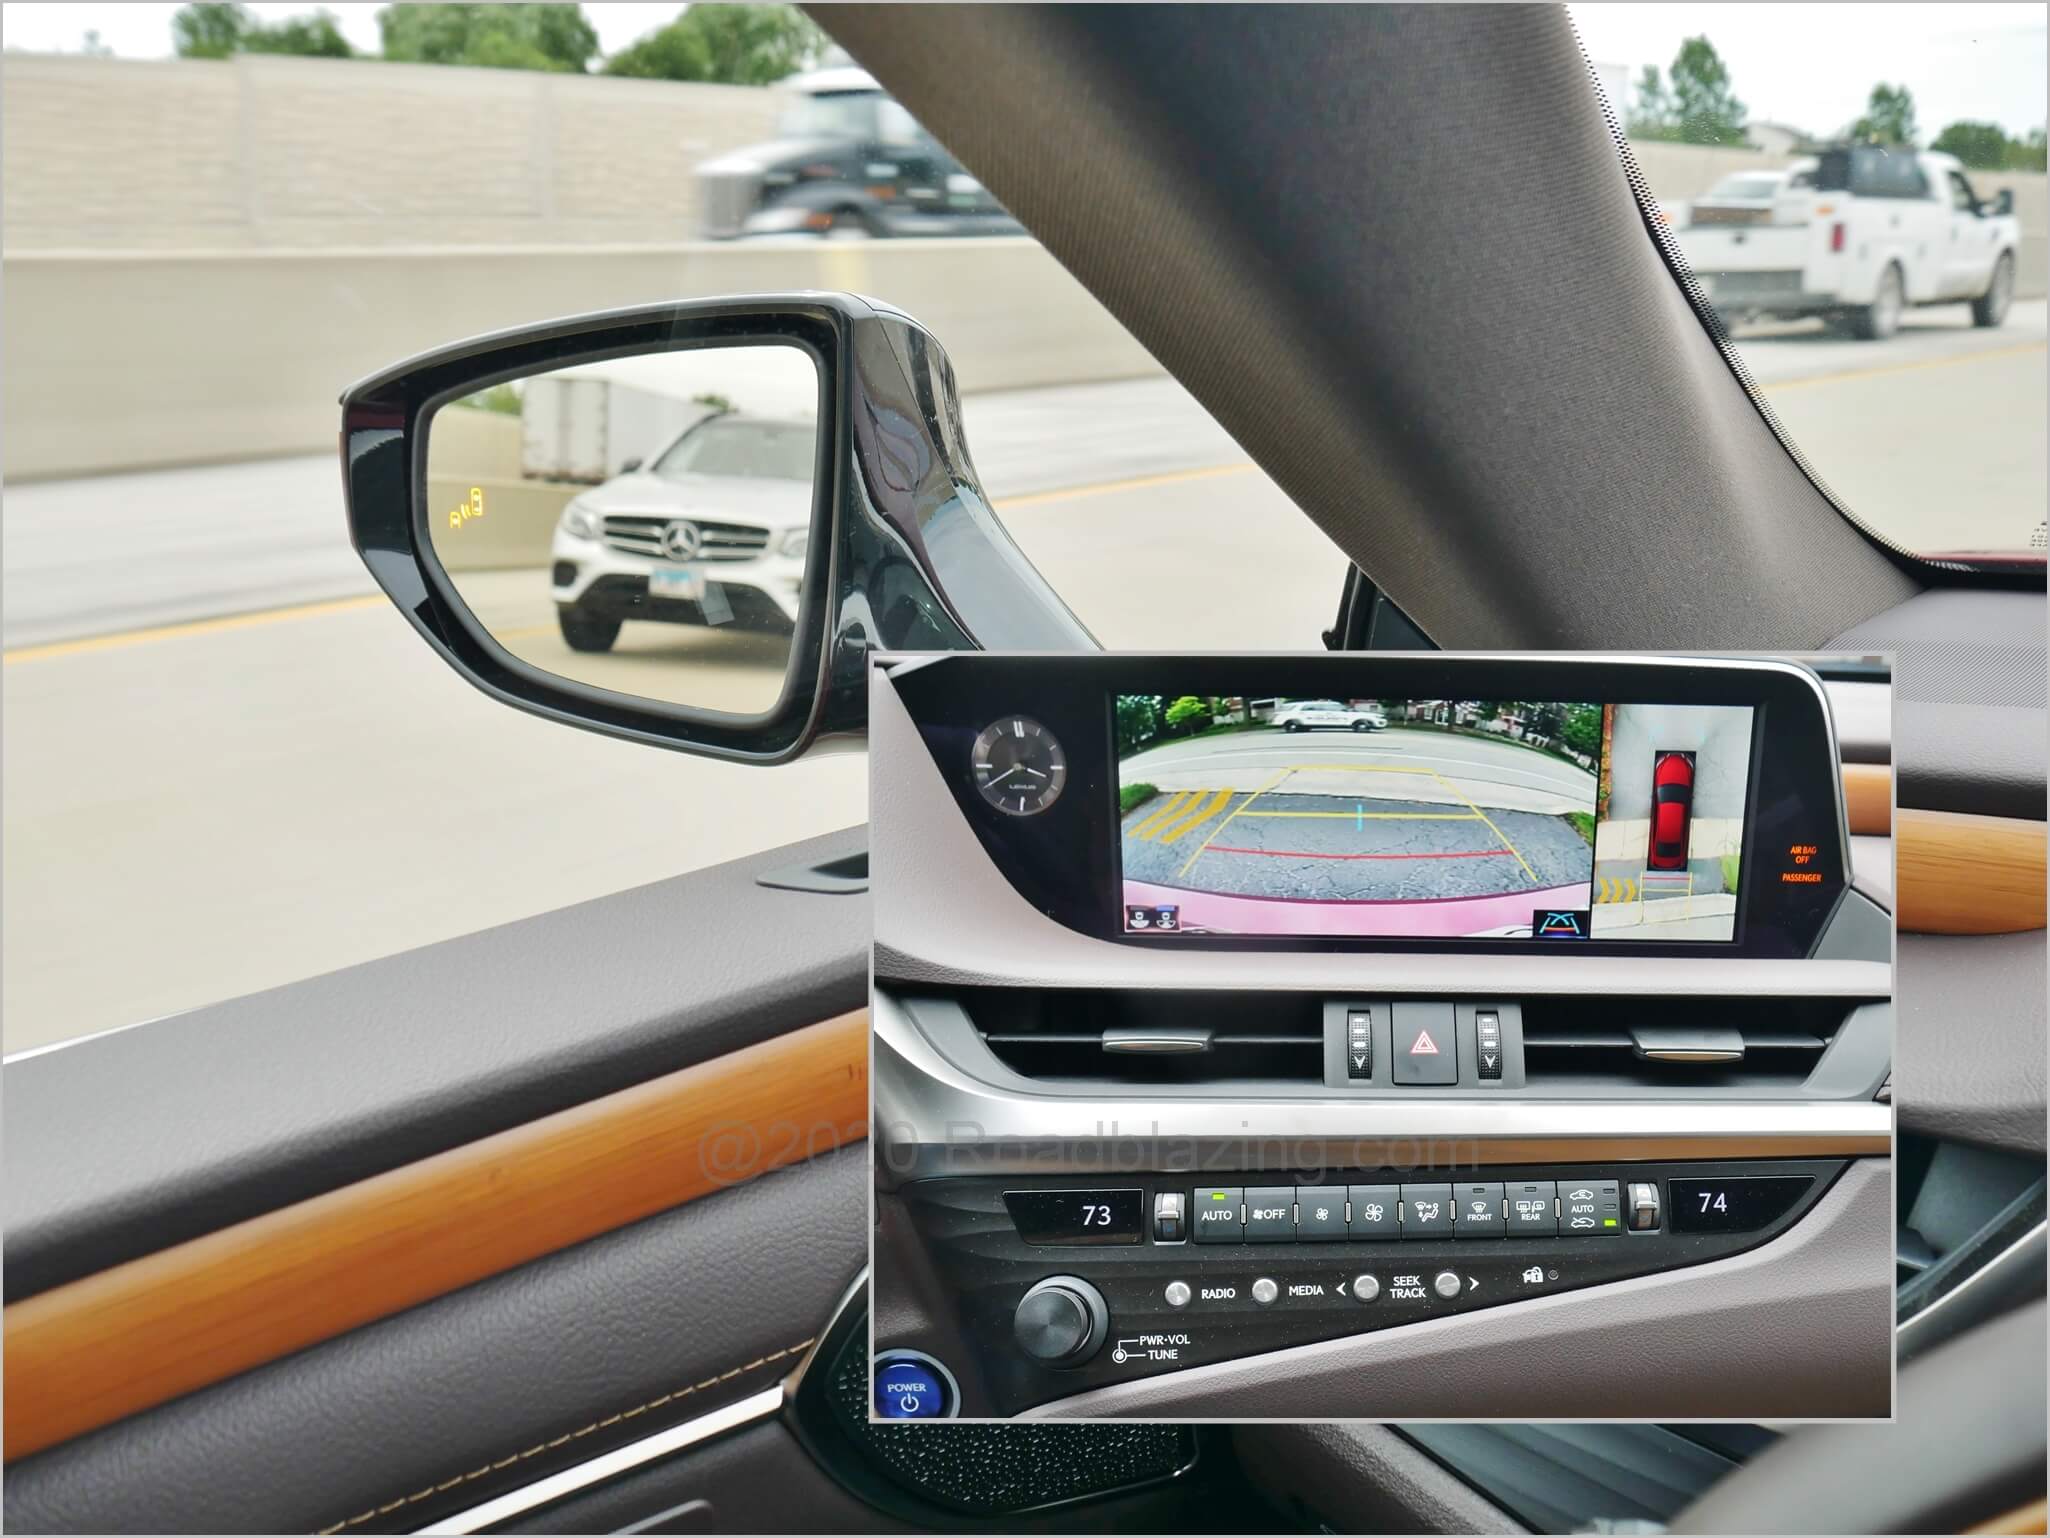 2020 Lexus ES 300h: Blind spot warning and available surround camera w/ rear cross traffic warning